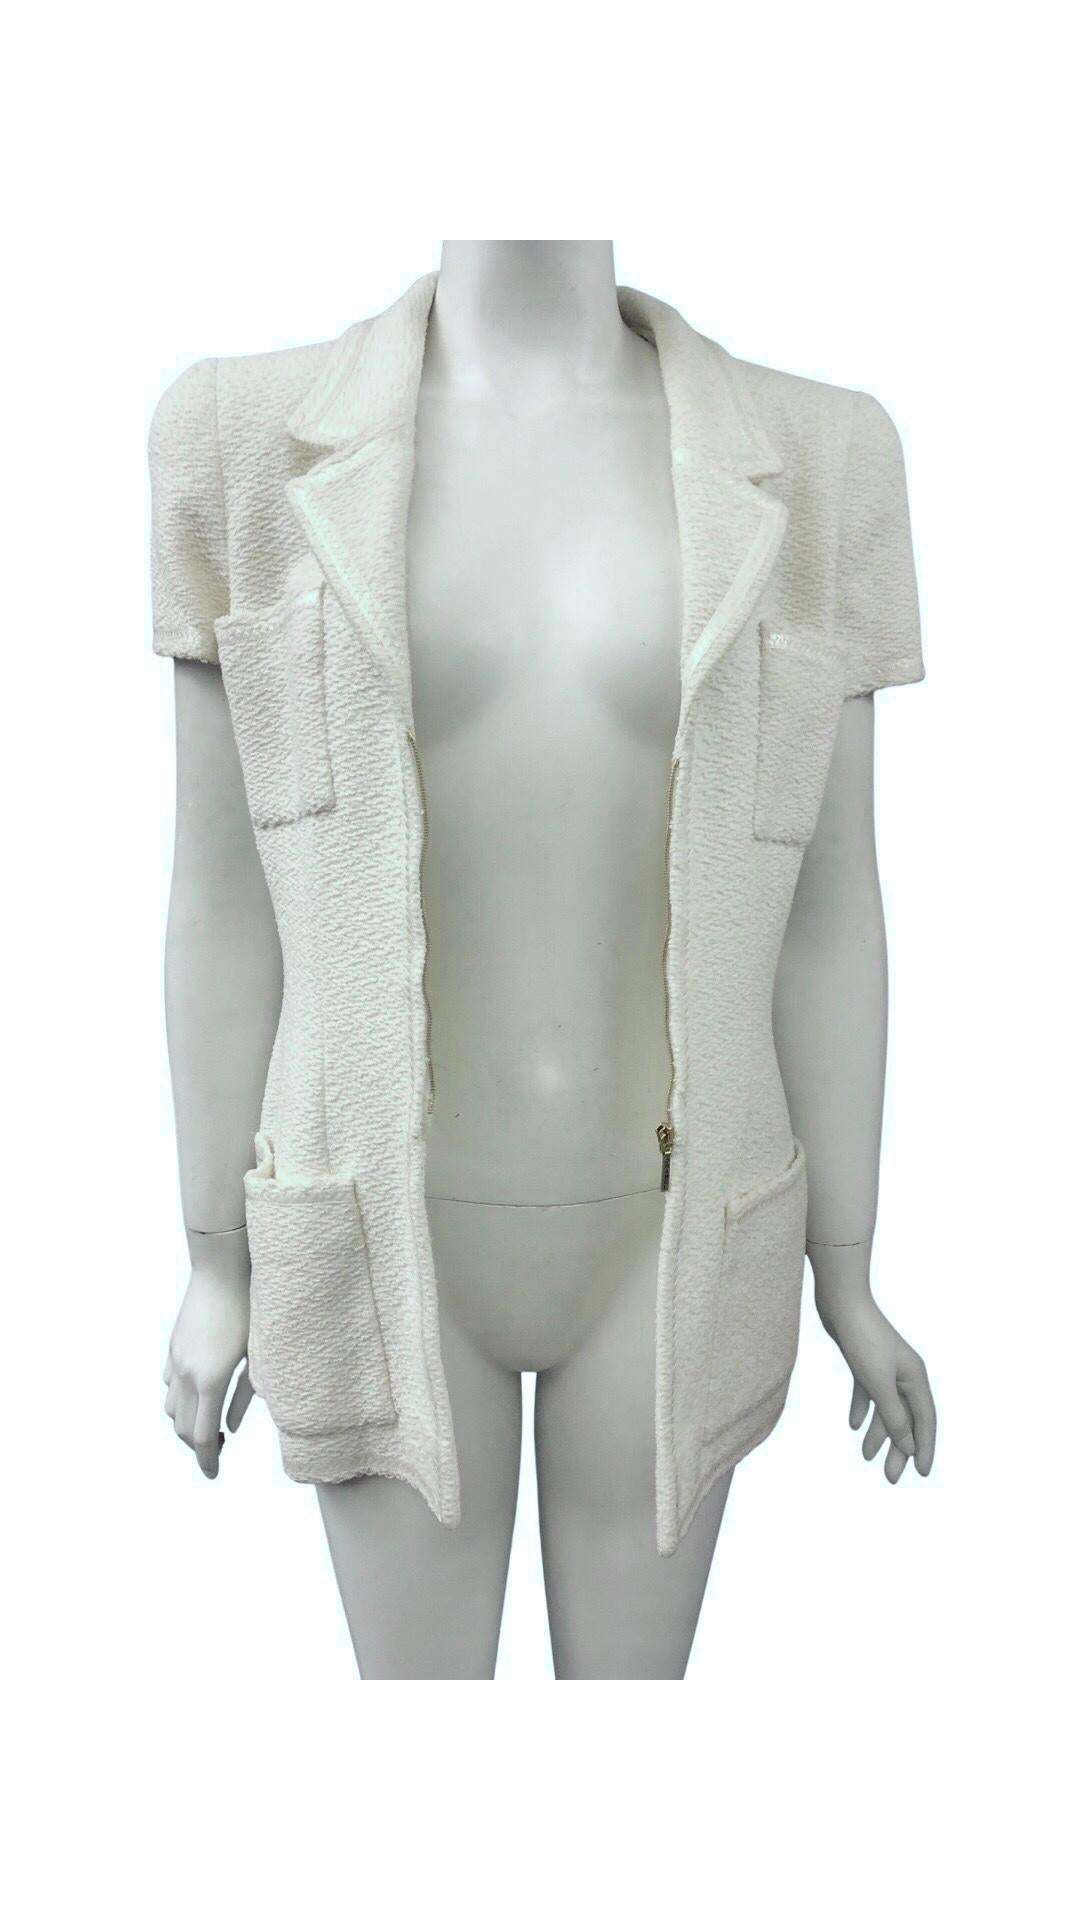 Chanel 1995 White Tweed Short Sleeves Jacket In Excellent Condition For Sale In Sheung Wan, HK